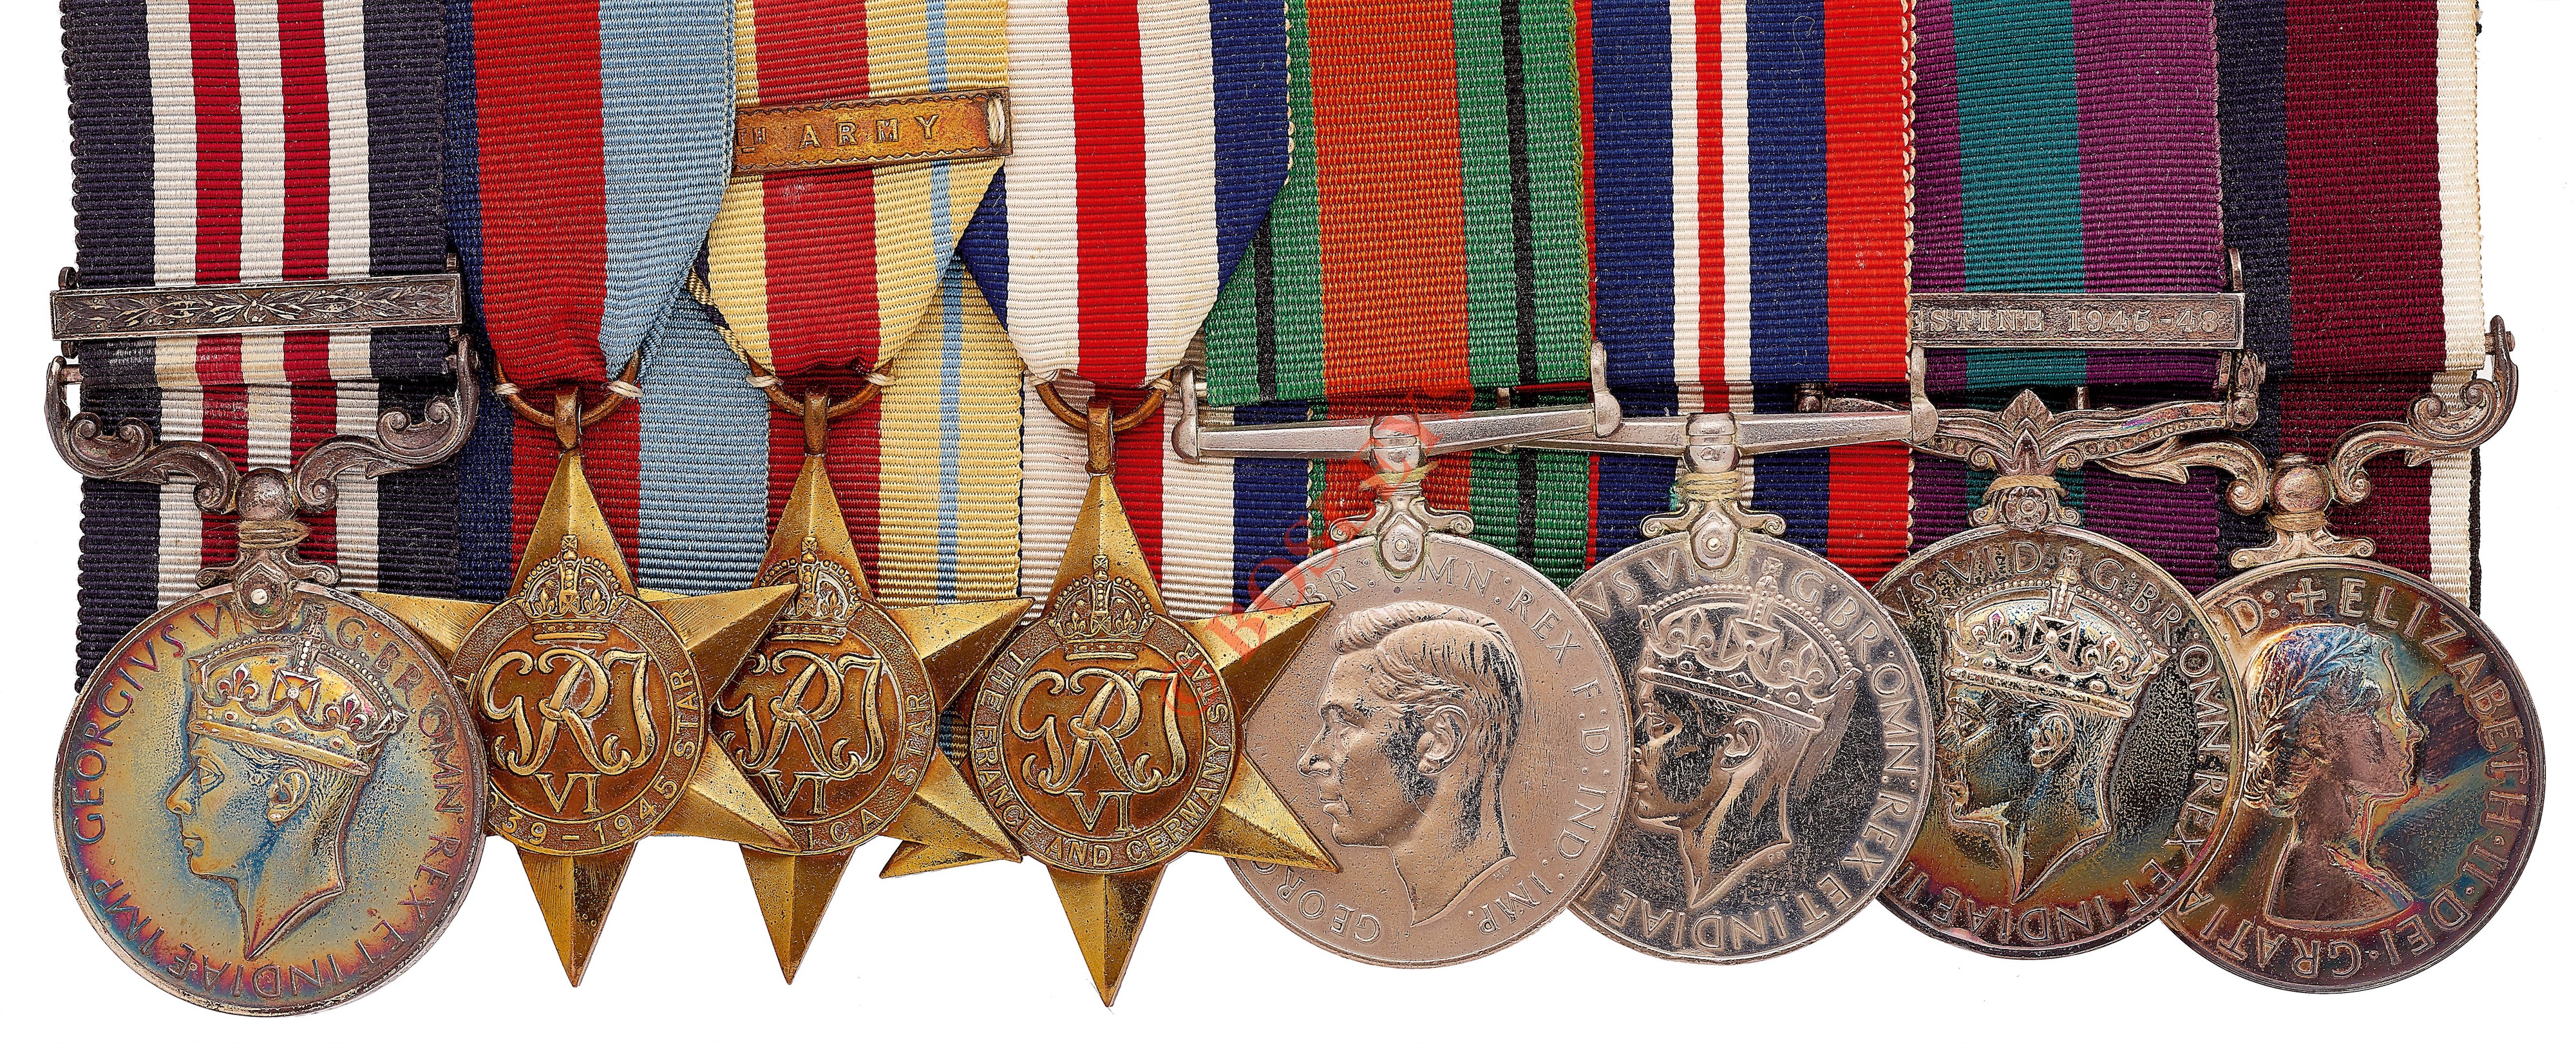 Special Air Service Regimentally Important SAS Founding Father’s Military Medal & Bar Group of 8 - Image 2 of 2